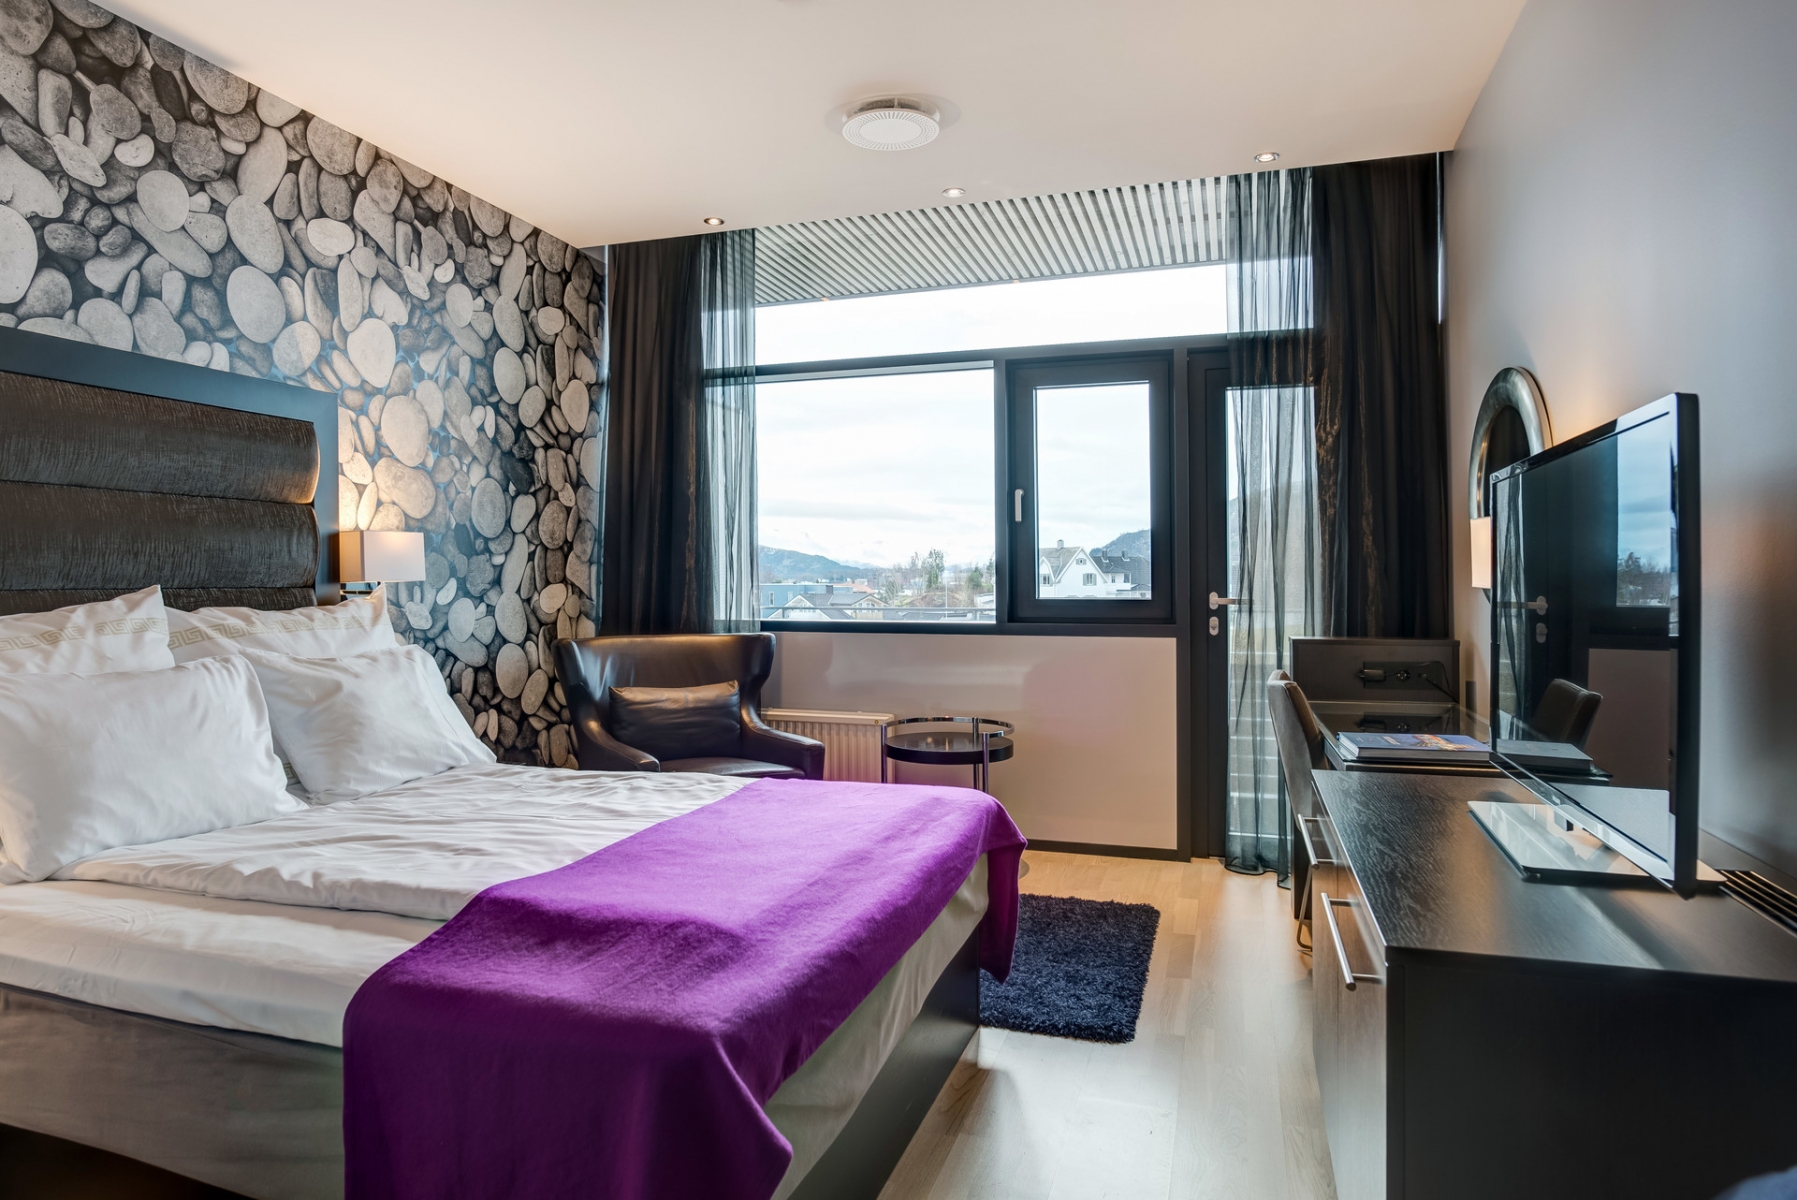 Quality Hotel Ulstein <br/>136.15 ew <br/> <a href='http://vakantieoplossing.nl/outpage/?id=16d2f911e684c76515c10e32e774440f' target='_blank'>View Details</a>